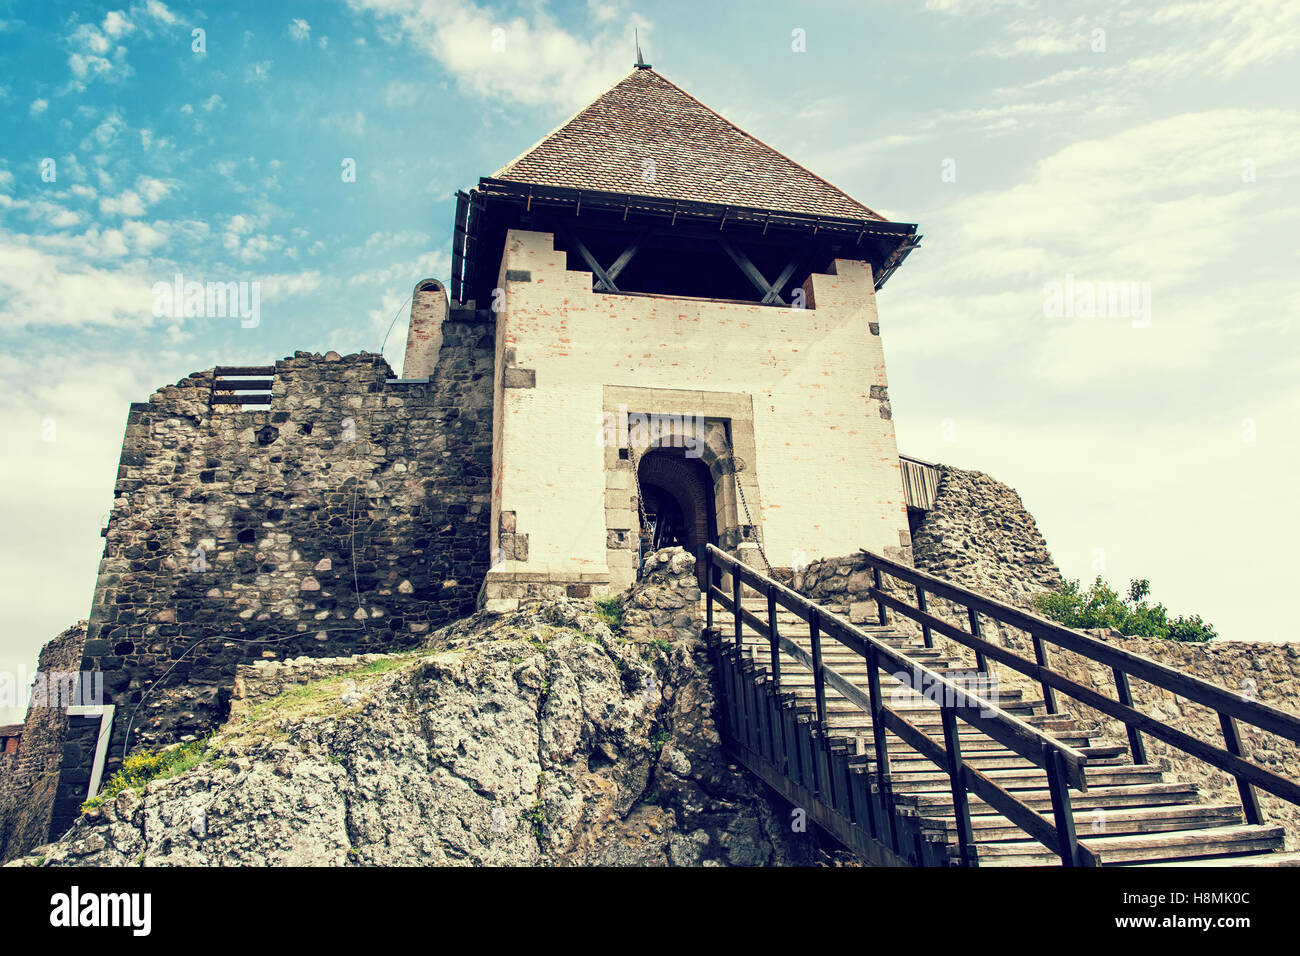 Ruin castle of Visegrad, Hungary. Ancient architecture with stairs. Travel destination. Cultural heritage. Retro photo filter. Stock Photo